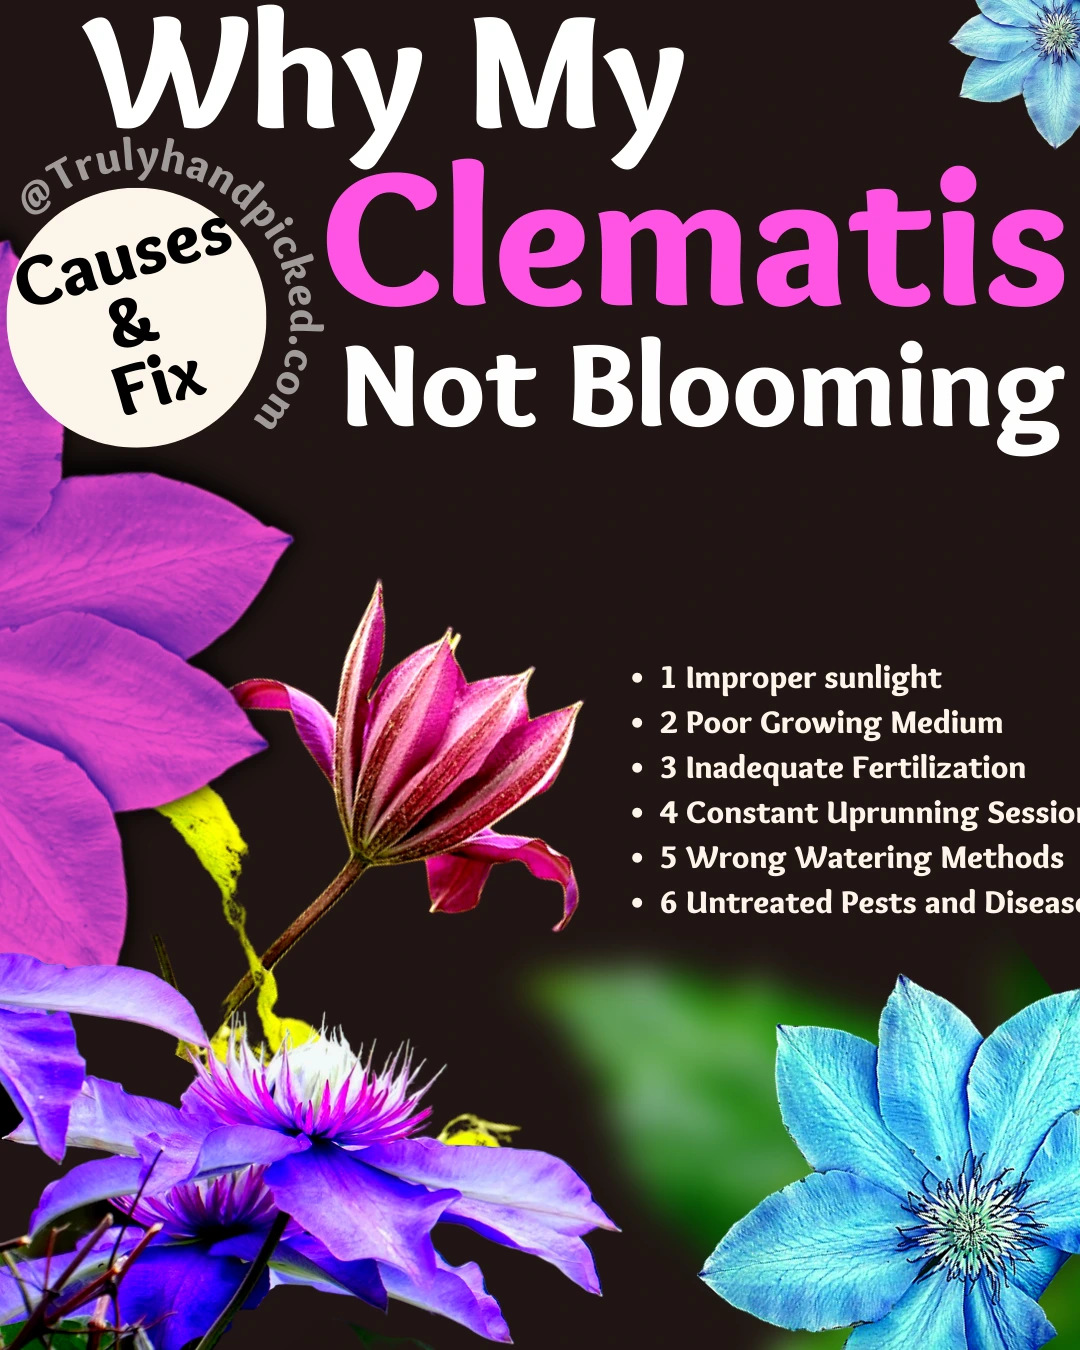 Why my clematis is not blooming reasons and how to fix